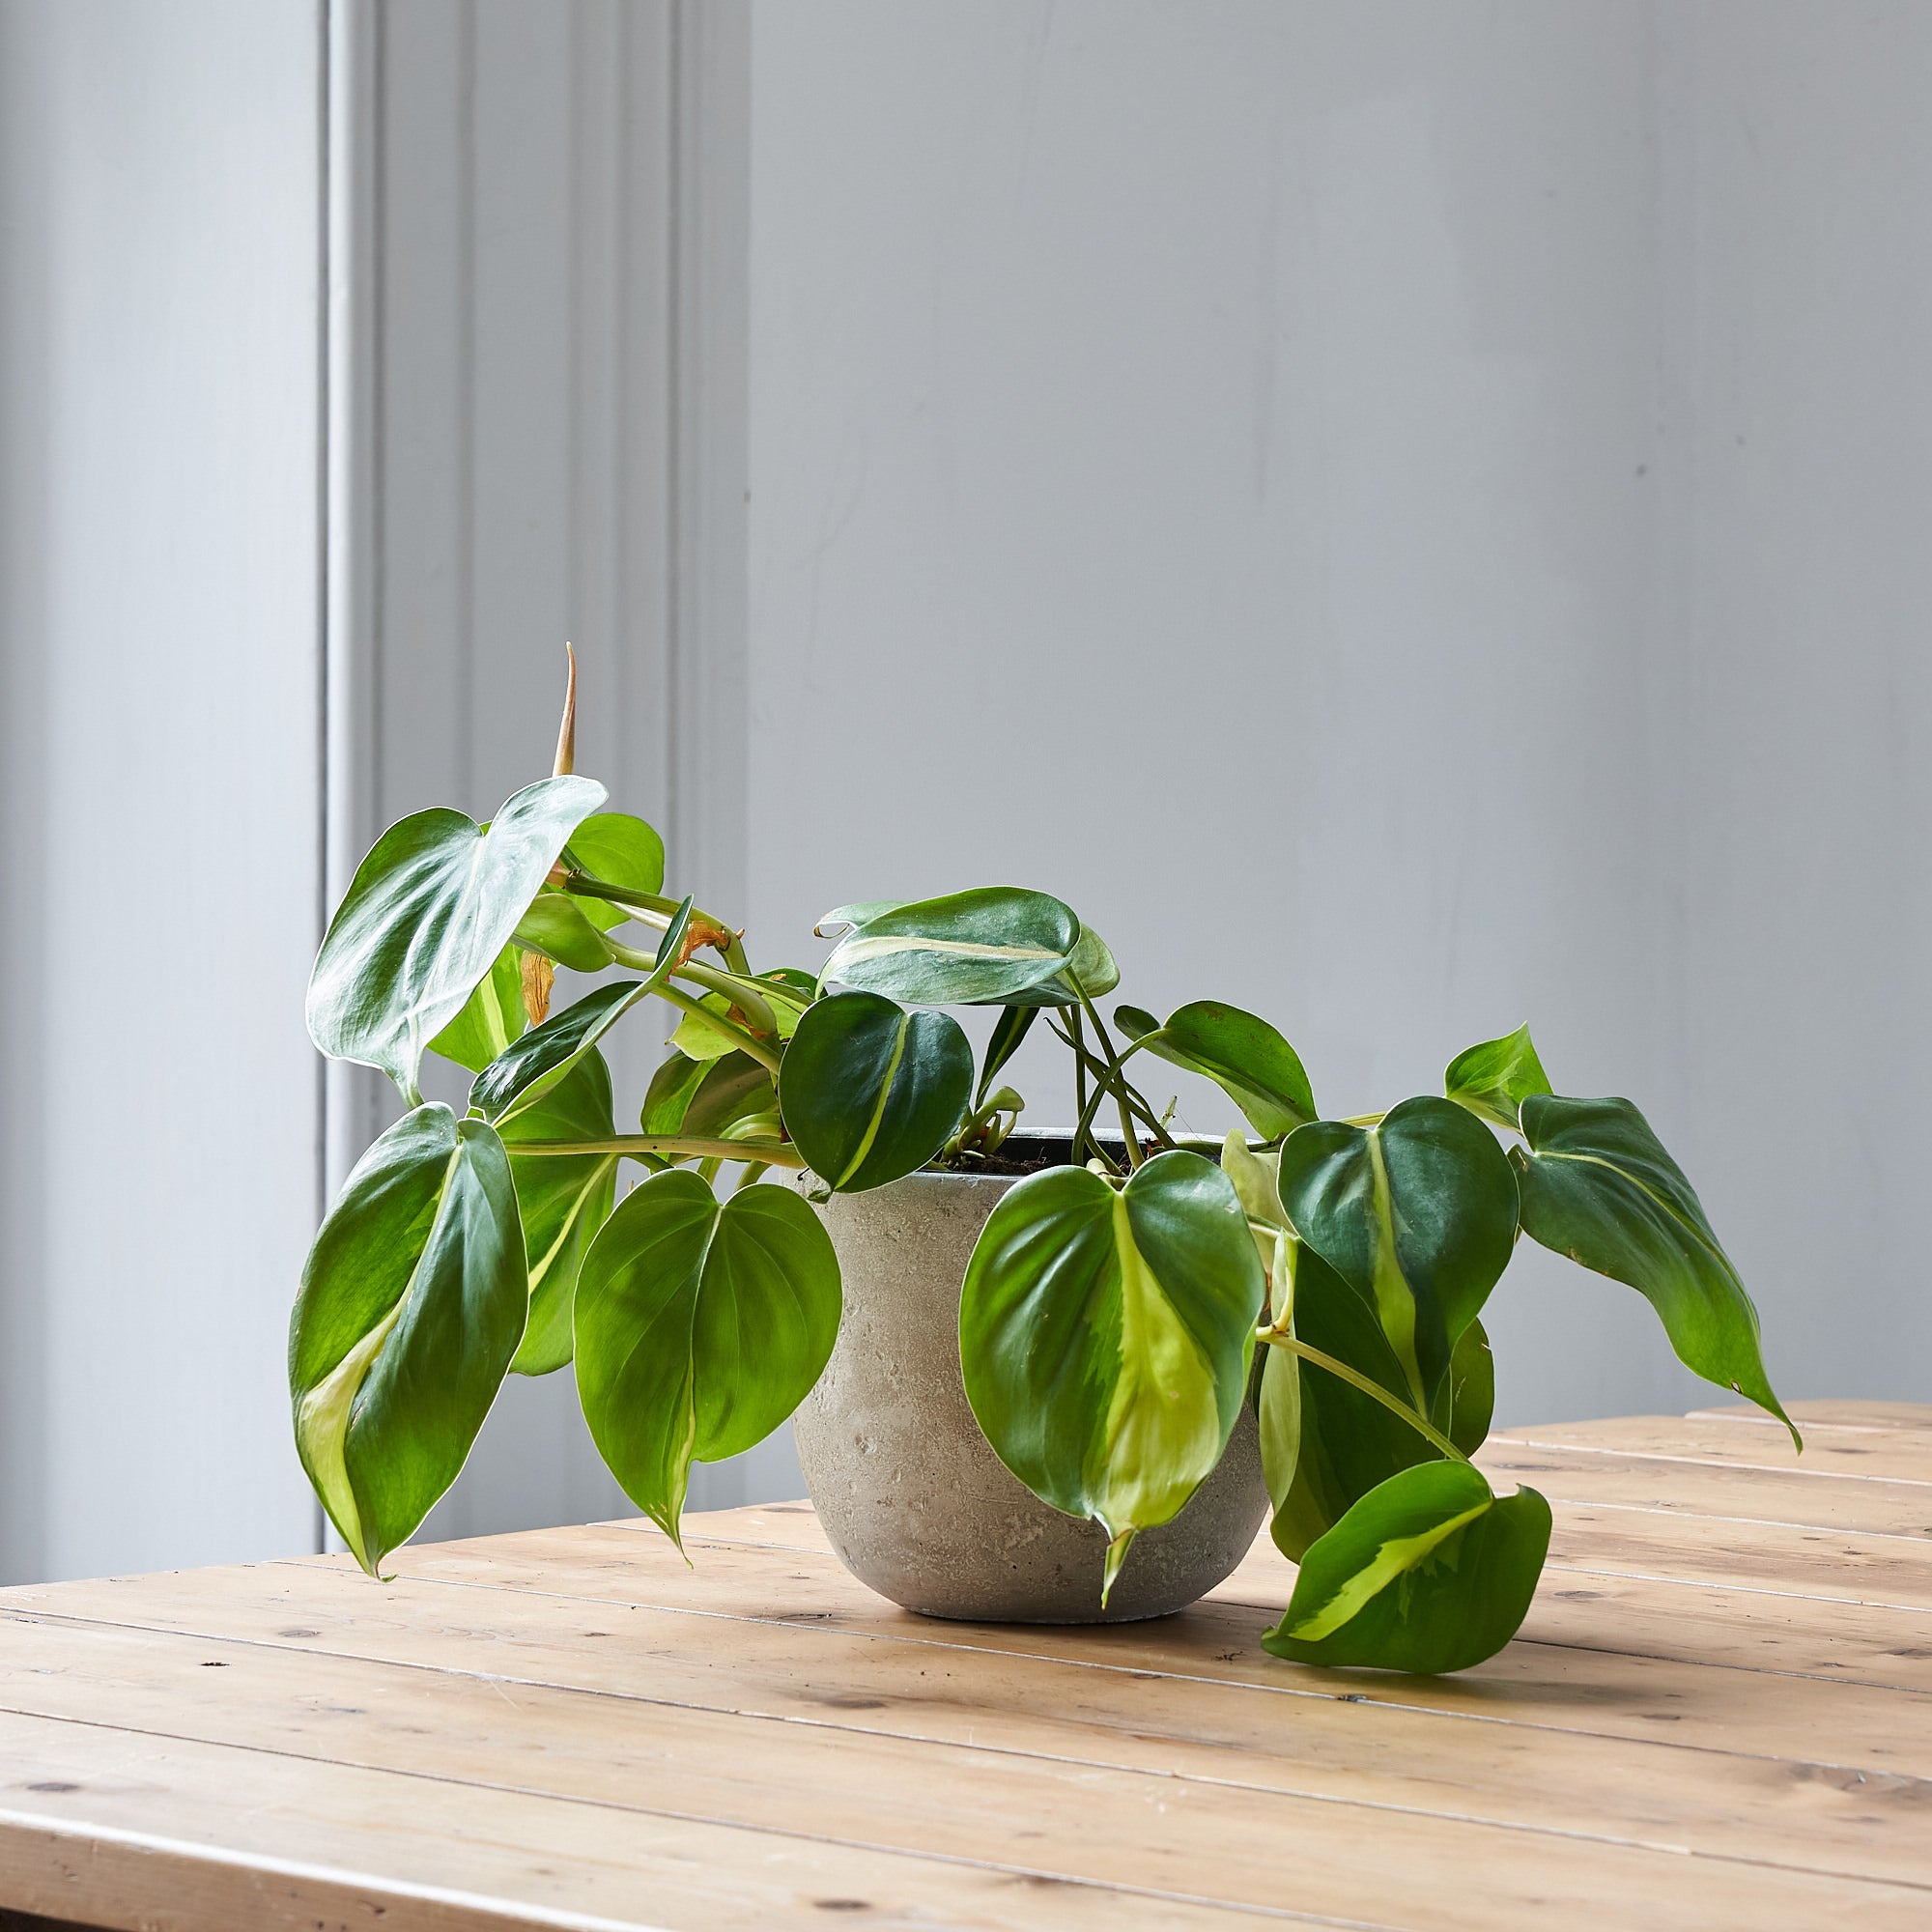 pothos plant order online delivery in London and UK